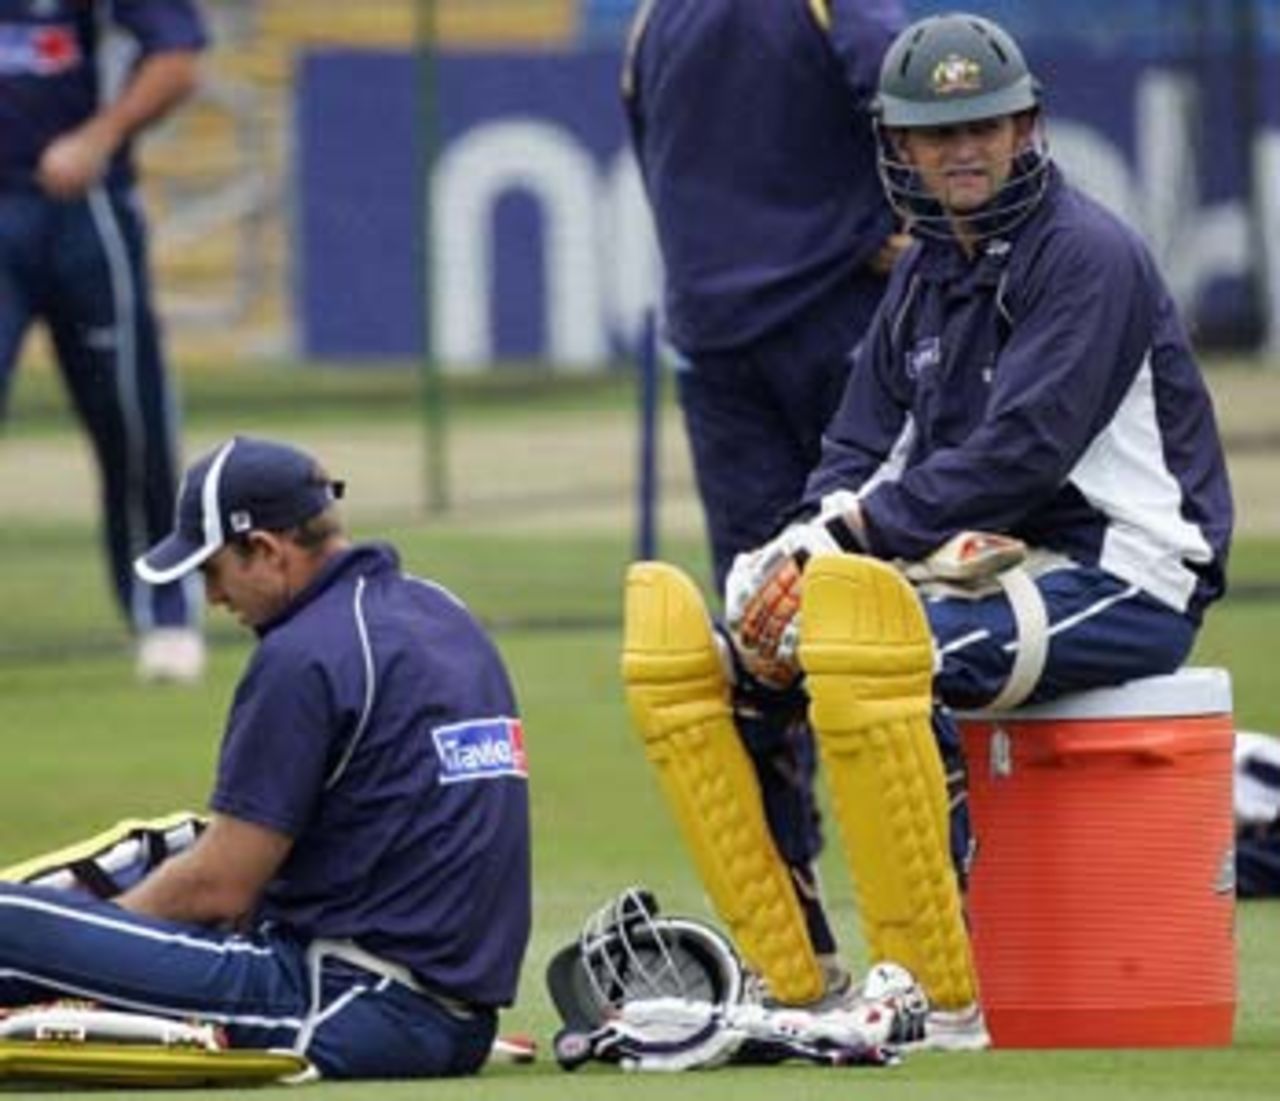 Adam Gilchrist in contemplative mood during training, Headingley, July 5, 2005